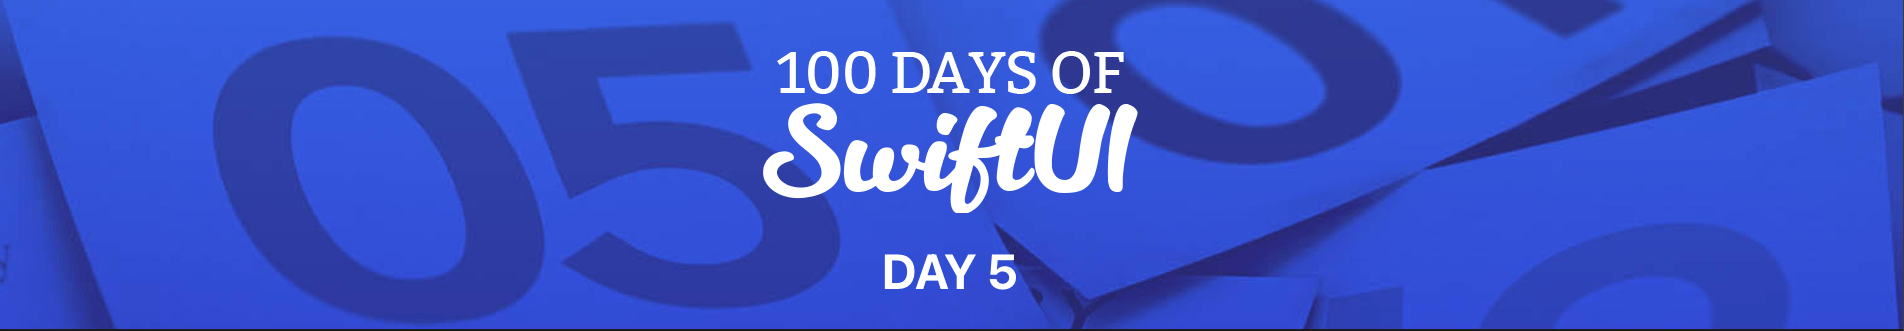 100 Days of SwiftUI - Day 5